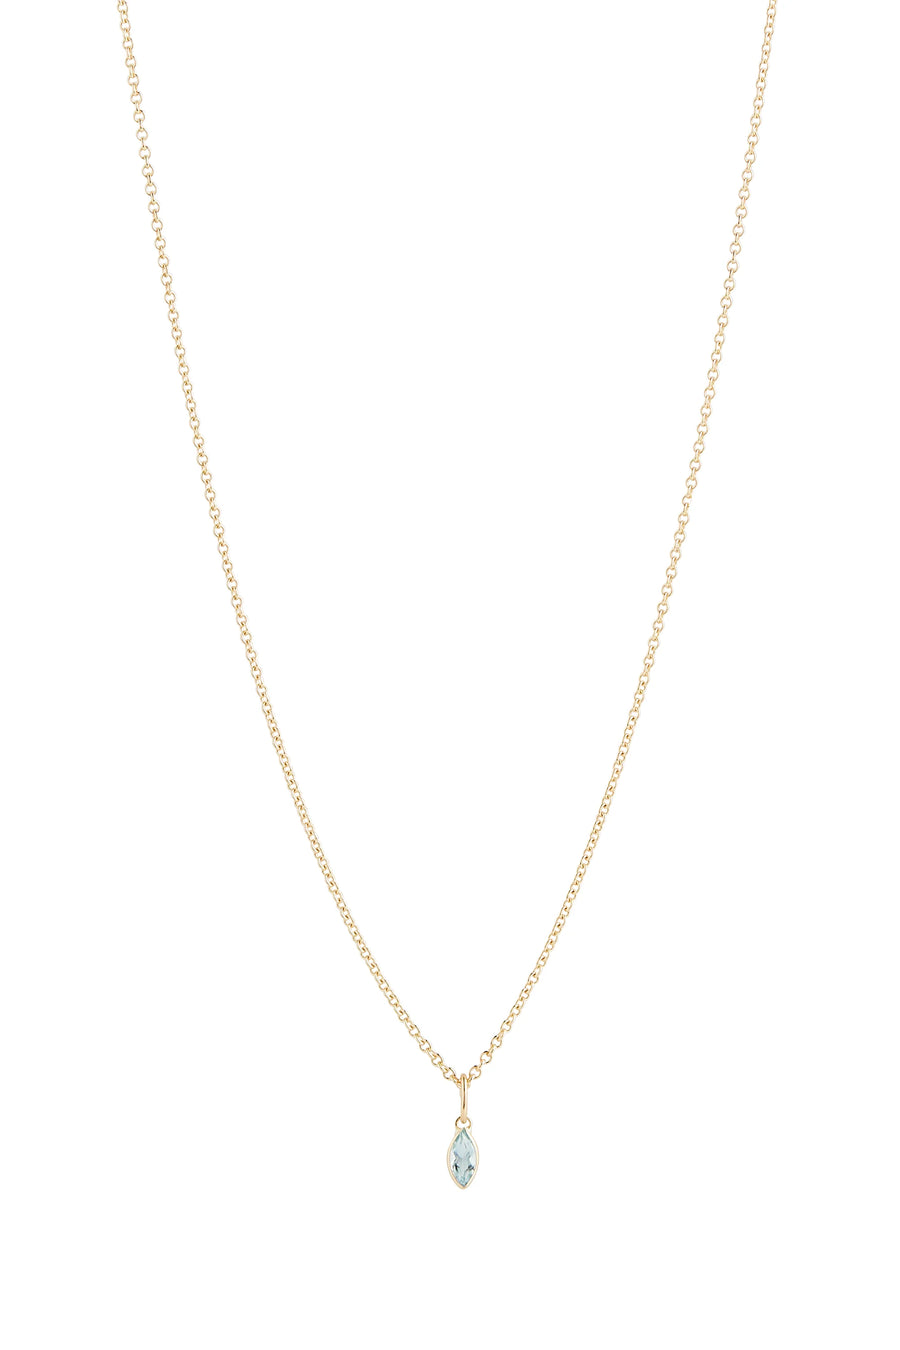 LISBETH JEWELRY - AERIEN NECKLACE - 14K GOLD FILLED